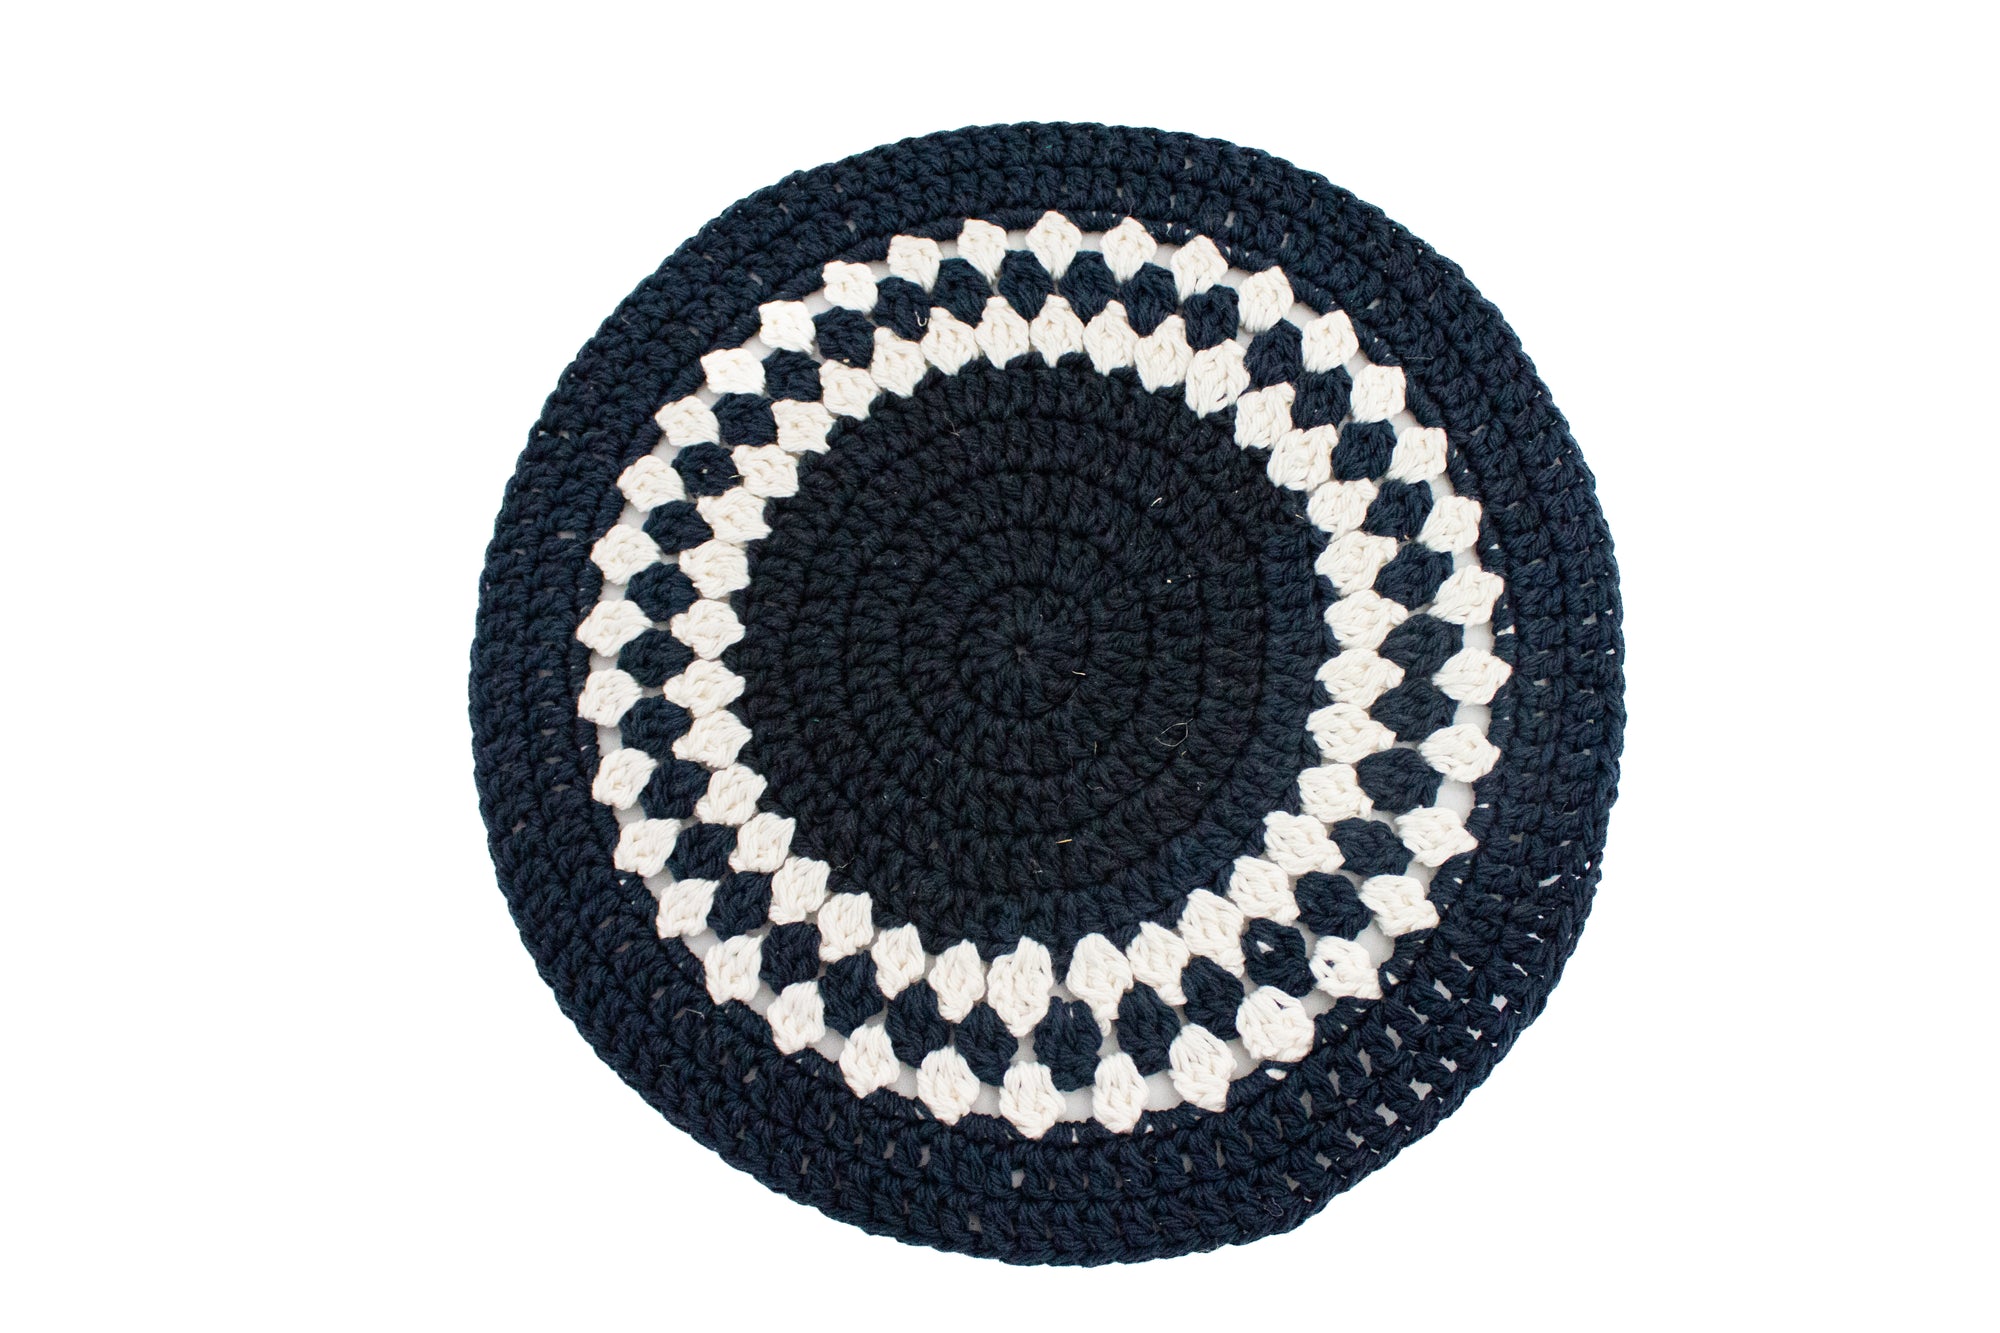 Crocheted Placemat - Various - Black / White